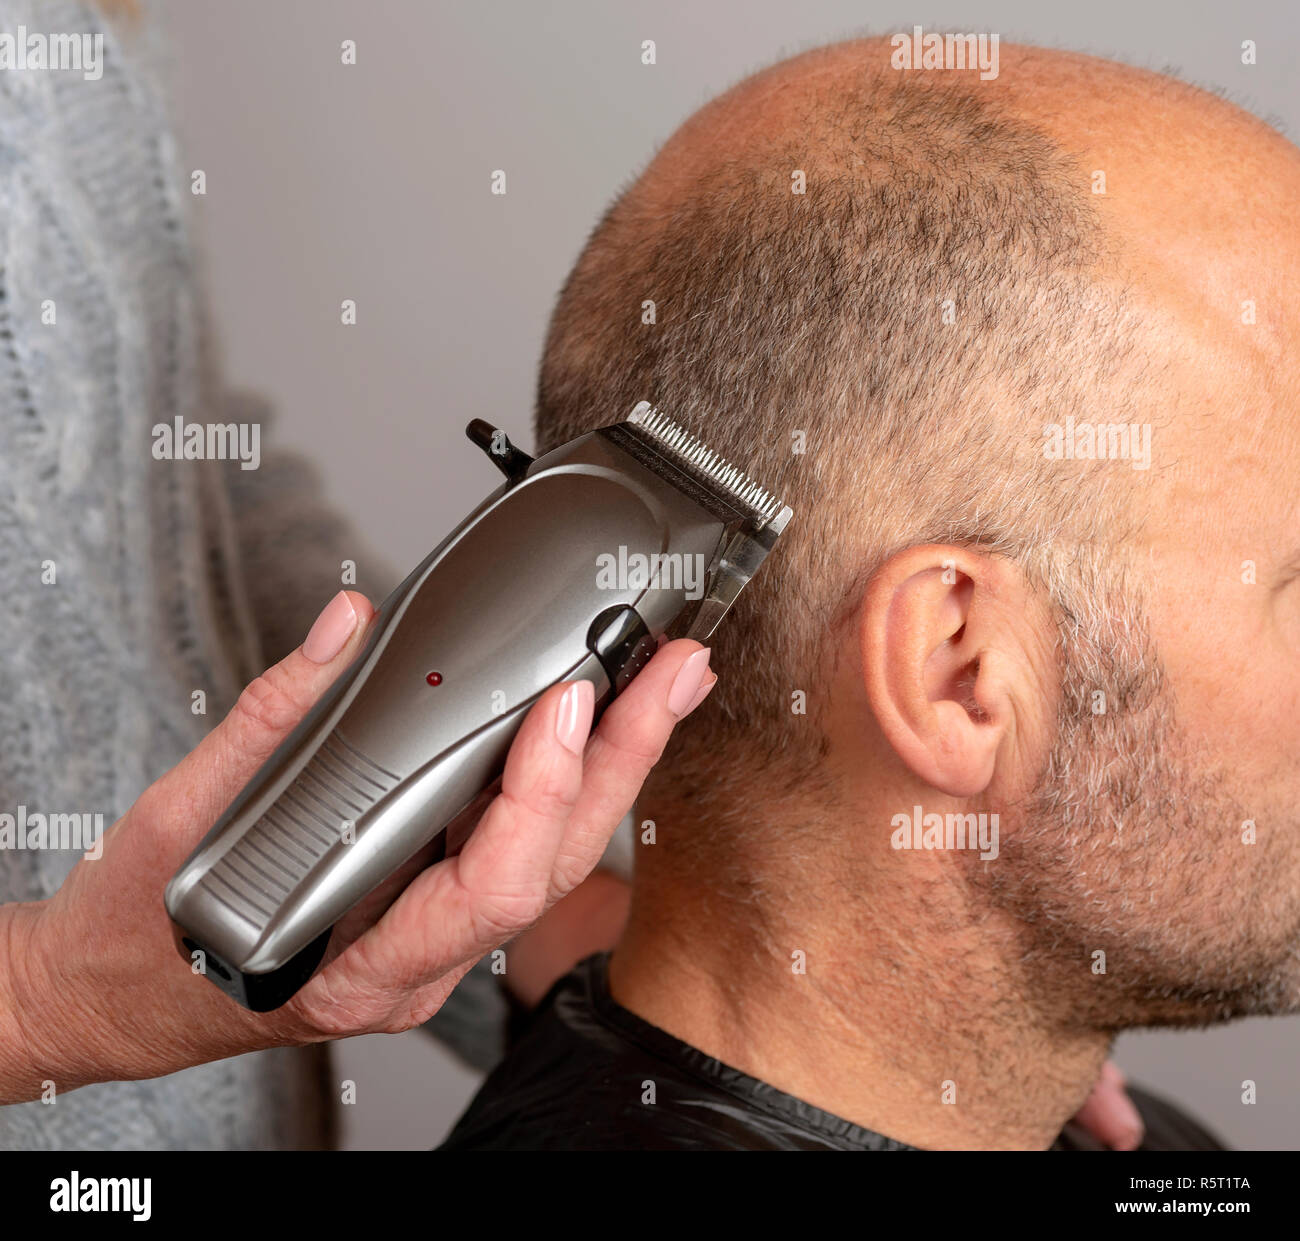 how to cut hair bald with clippers